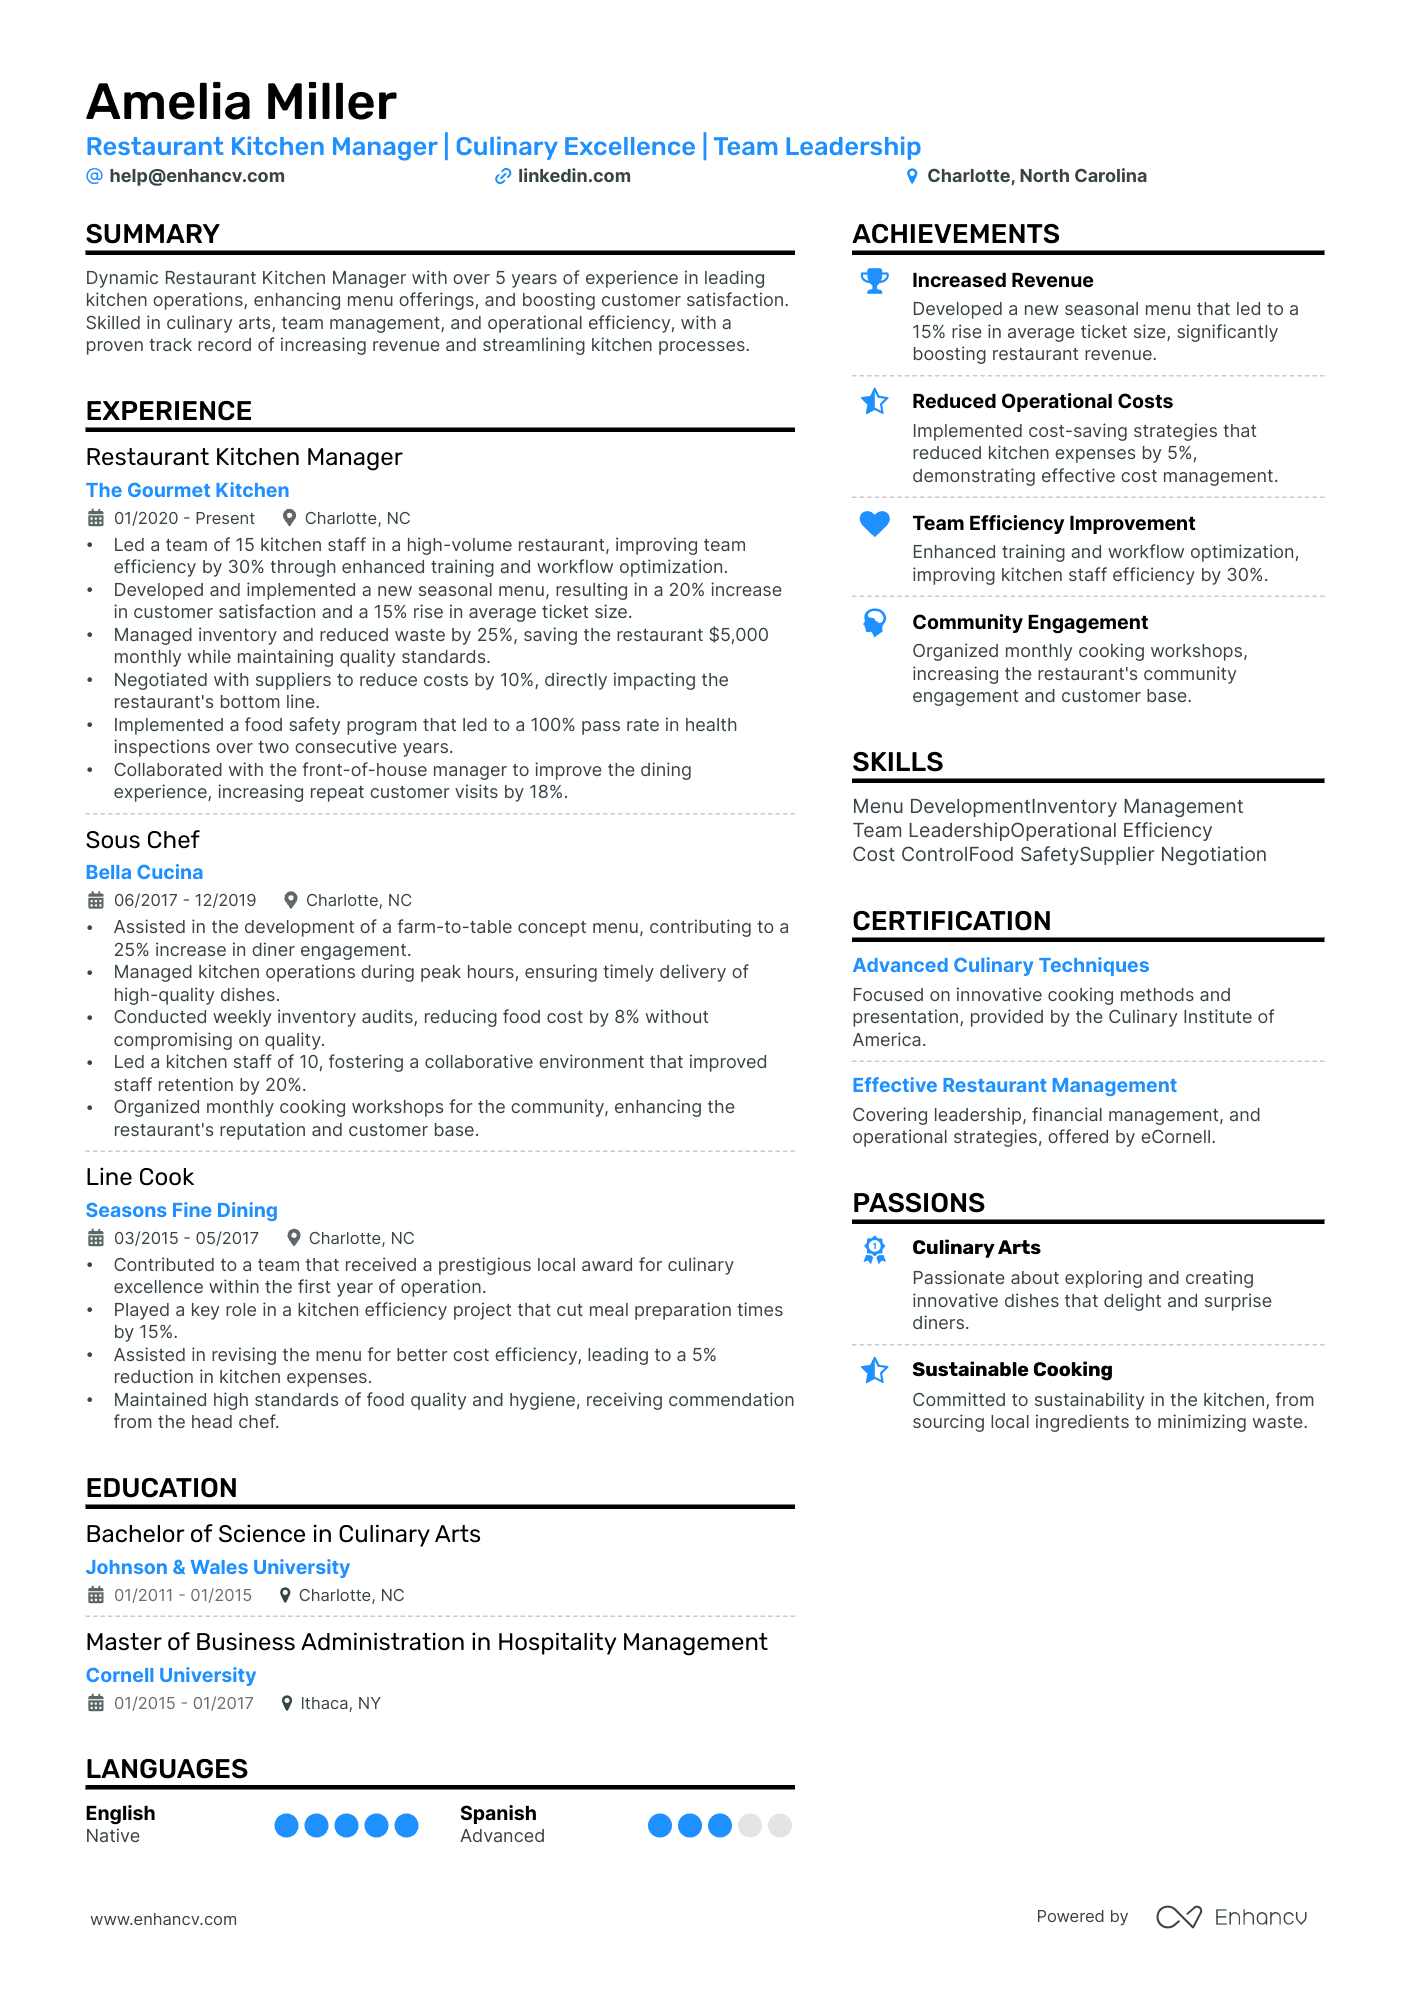 Restaurant Kitchen Manager | Culinary Excellence | Team Leadership resume example